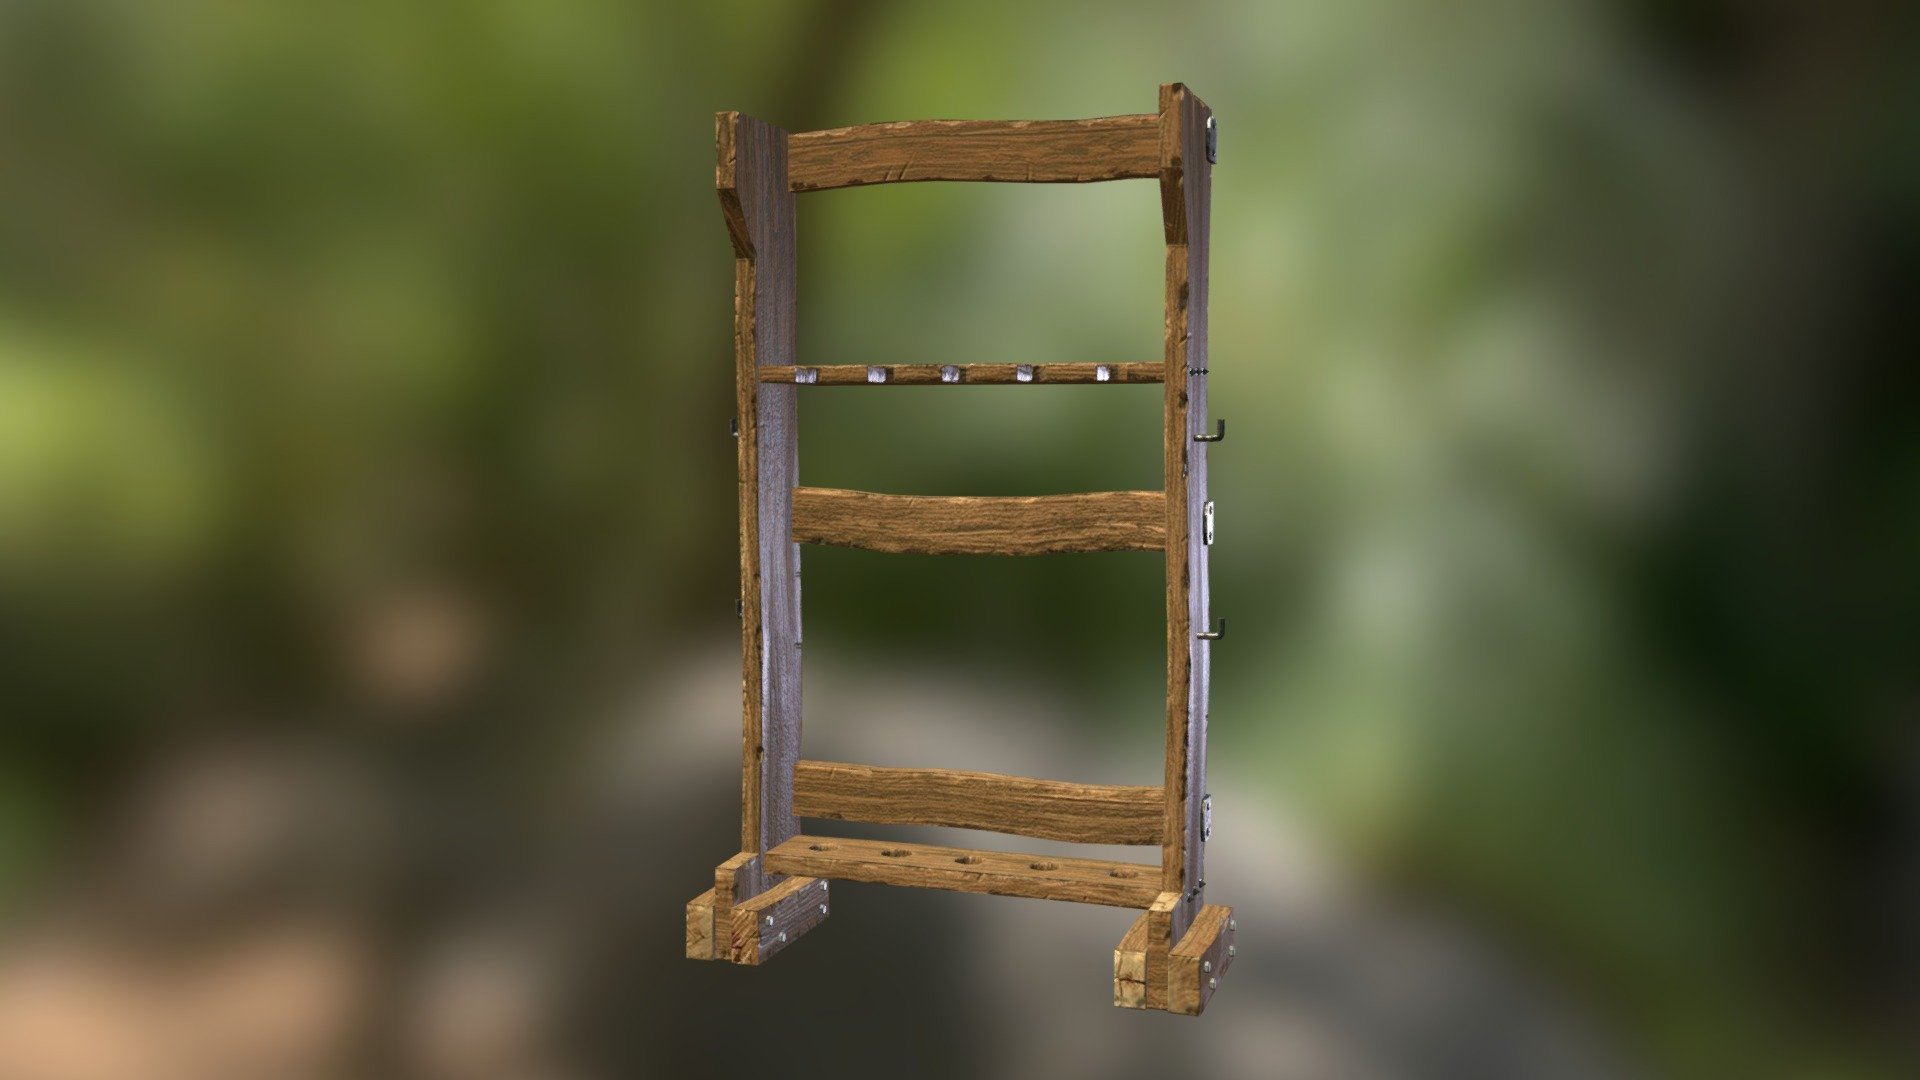 Game prop I made for a now cancelled fantasy project 3d model